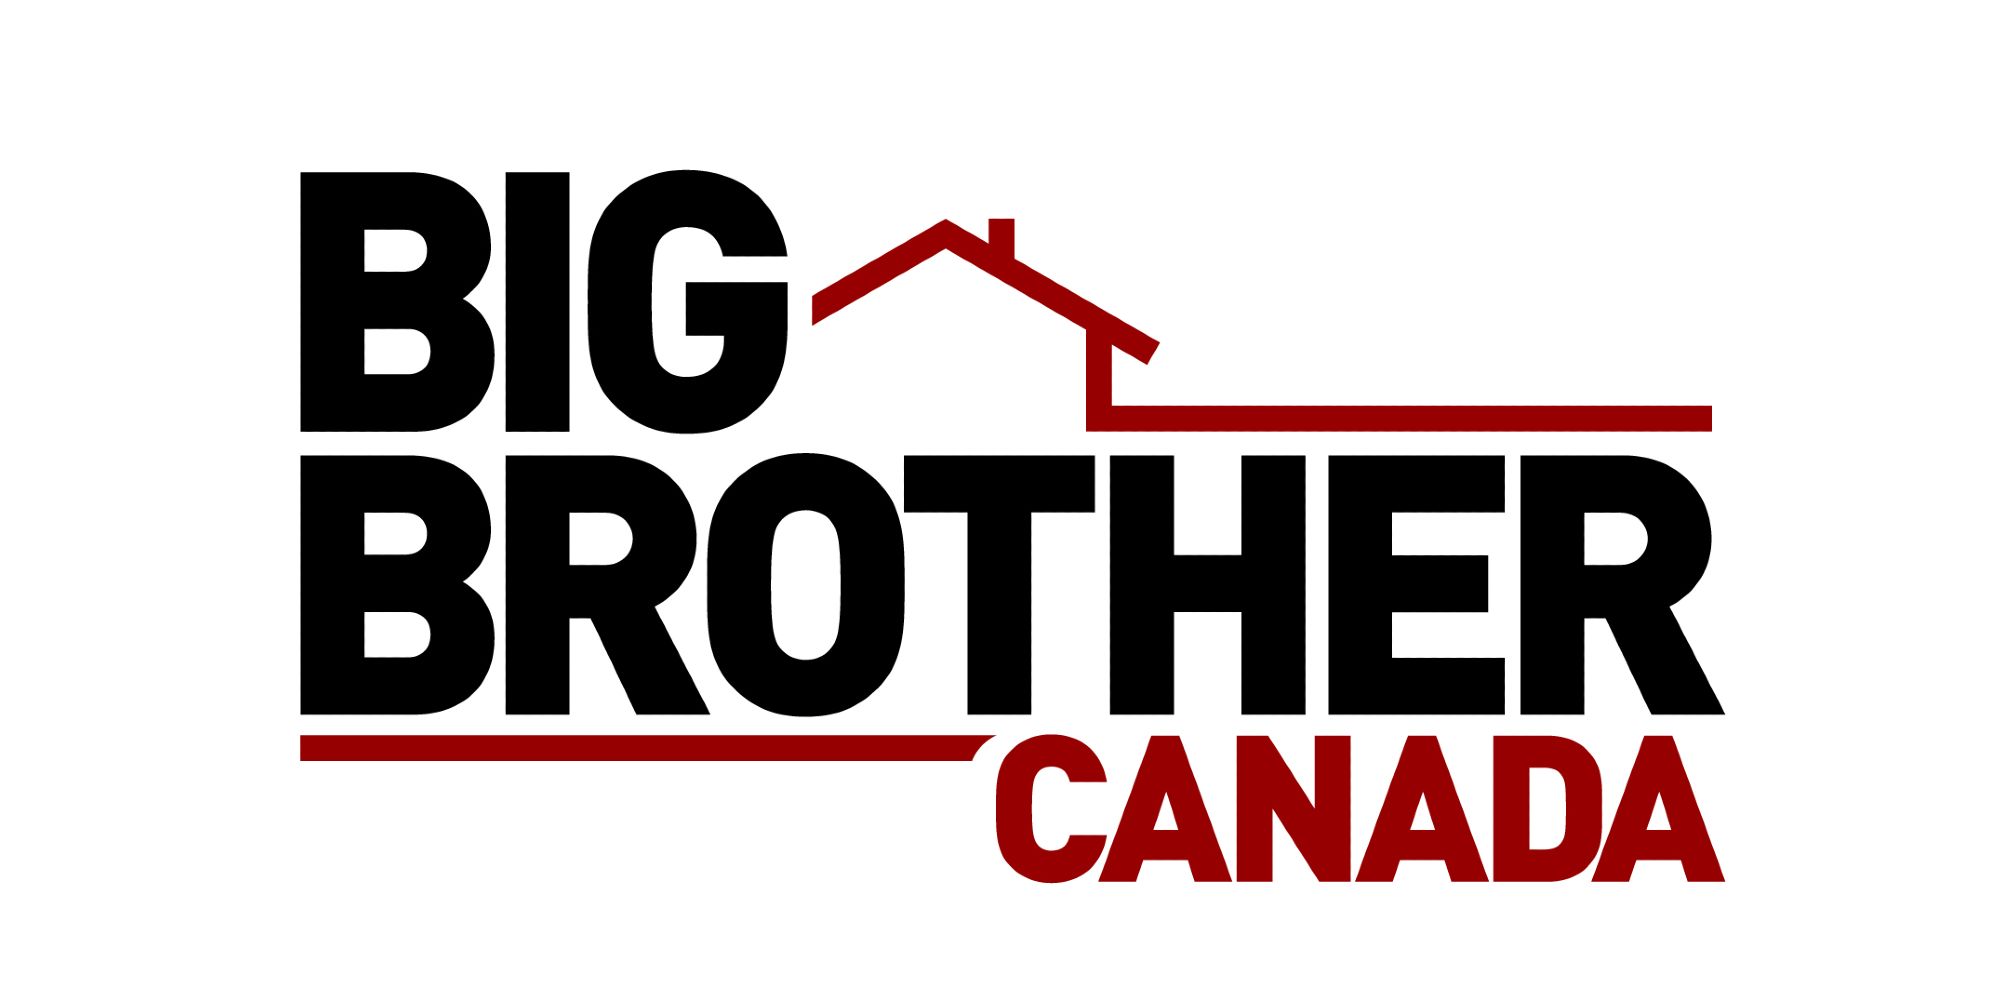 What To Expect From Big Brother Canada Season 9 Episode 1?